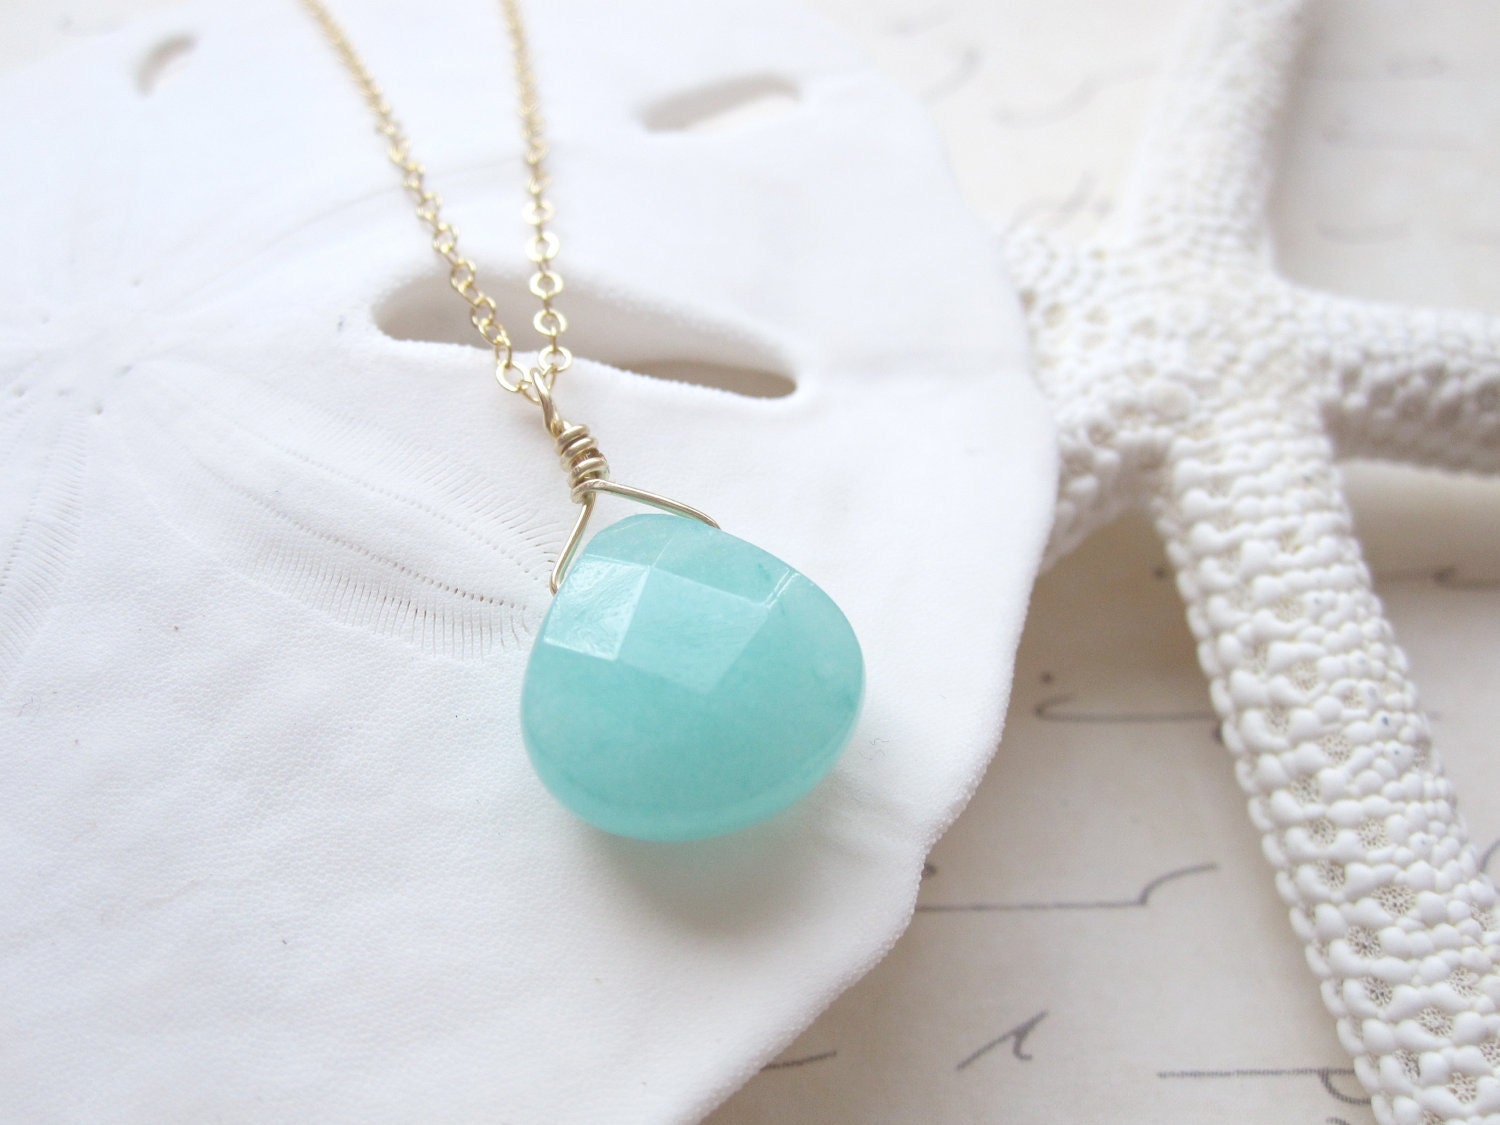 Aqua Seafoam Green Teardrop Faceted Briolette  Necklace 14k Gold Filled Chain Also Available in Sterling Silver - shoprhubarb